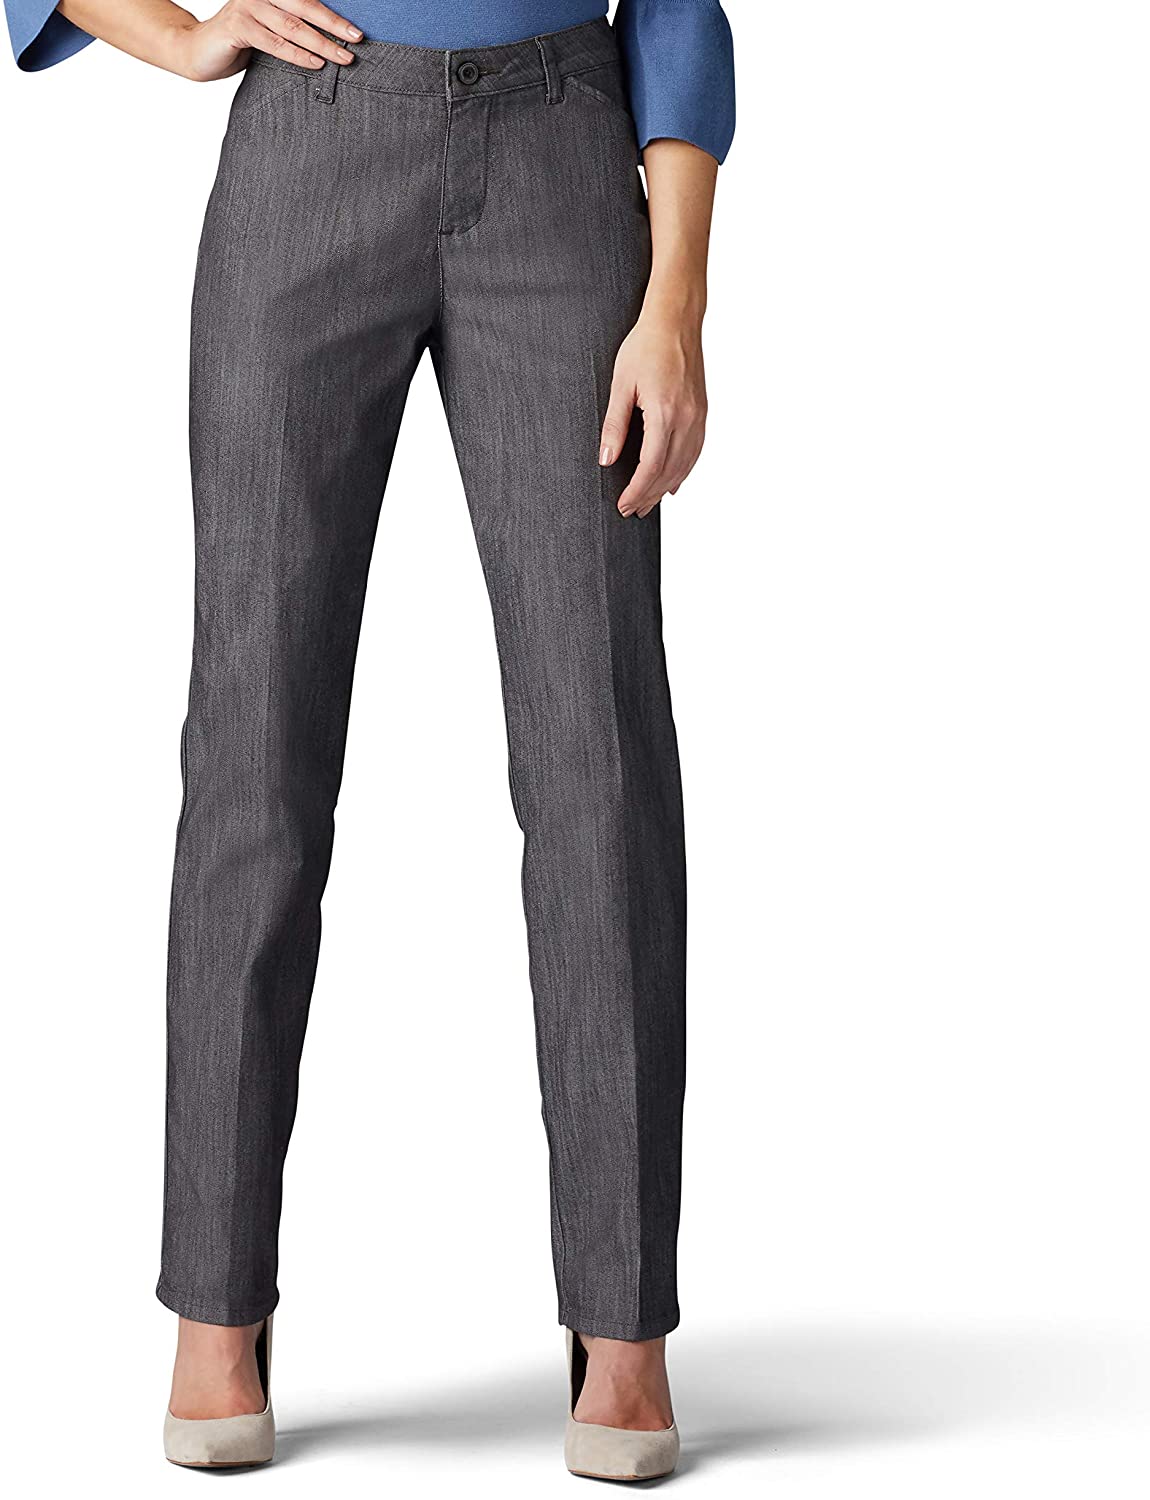 LEE Women's Relaxed Fit All Day Straight Leg Pant | eBay